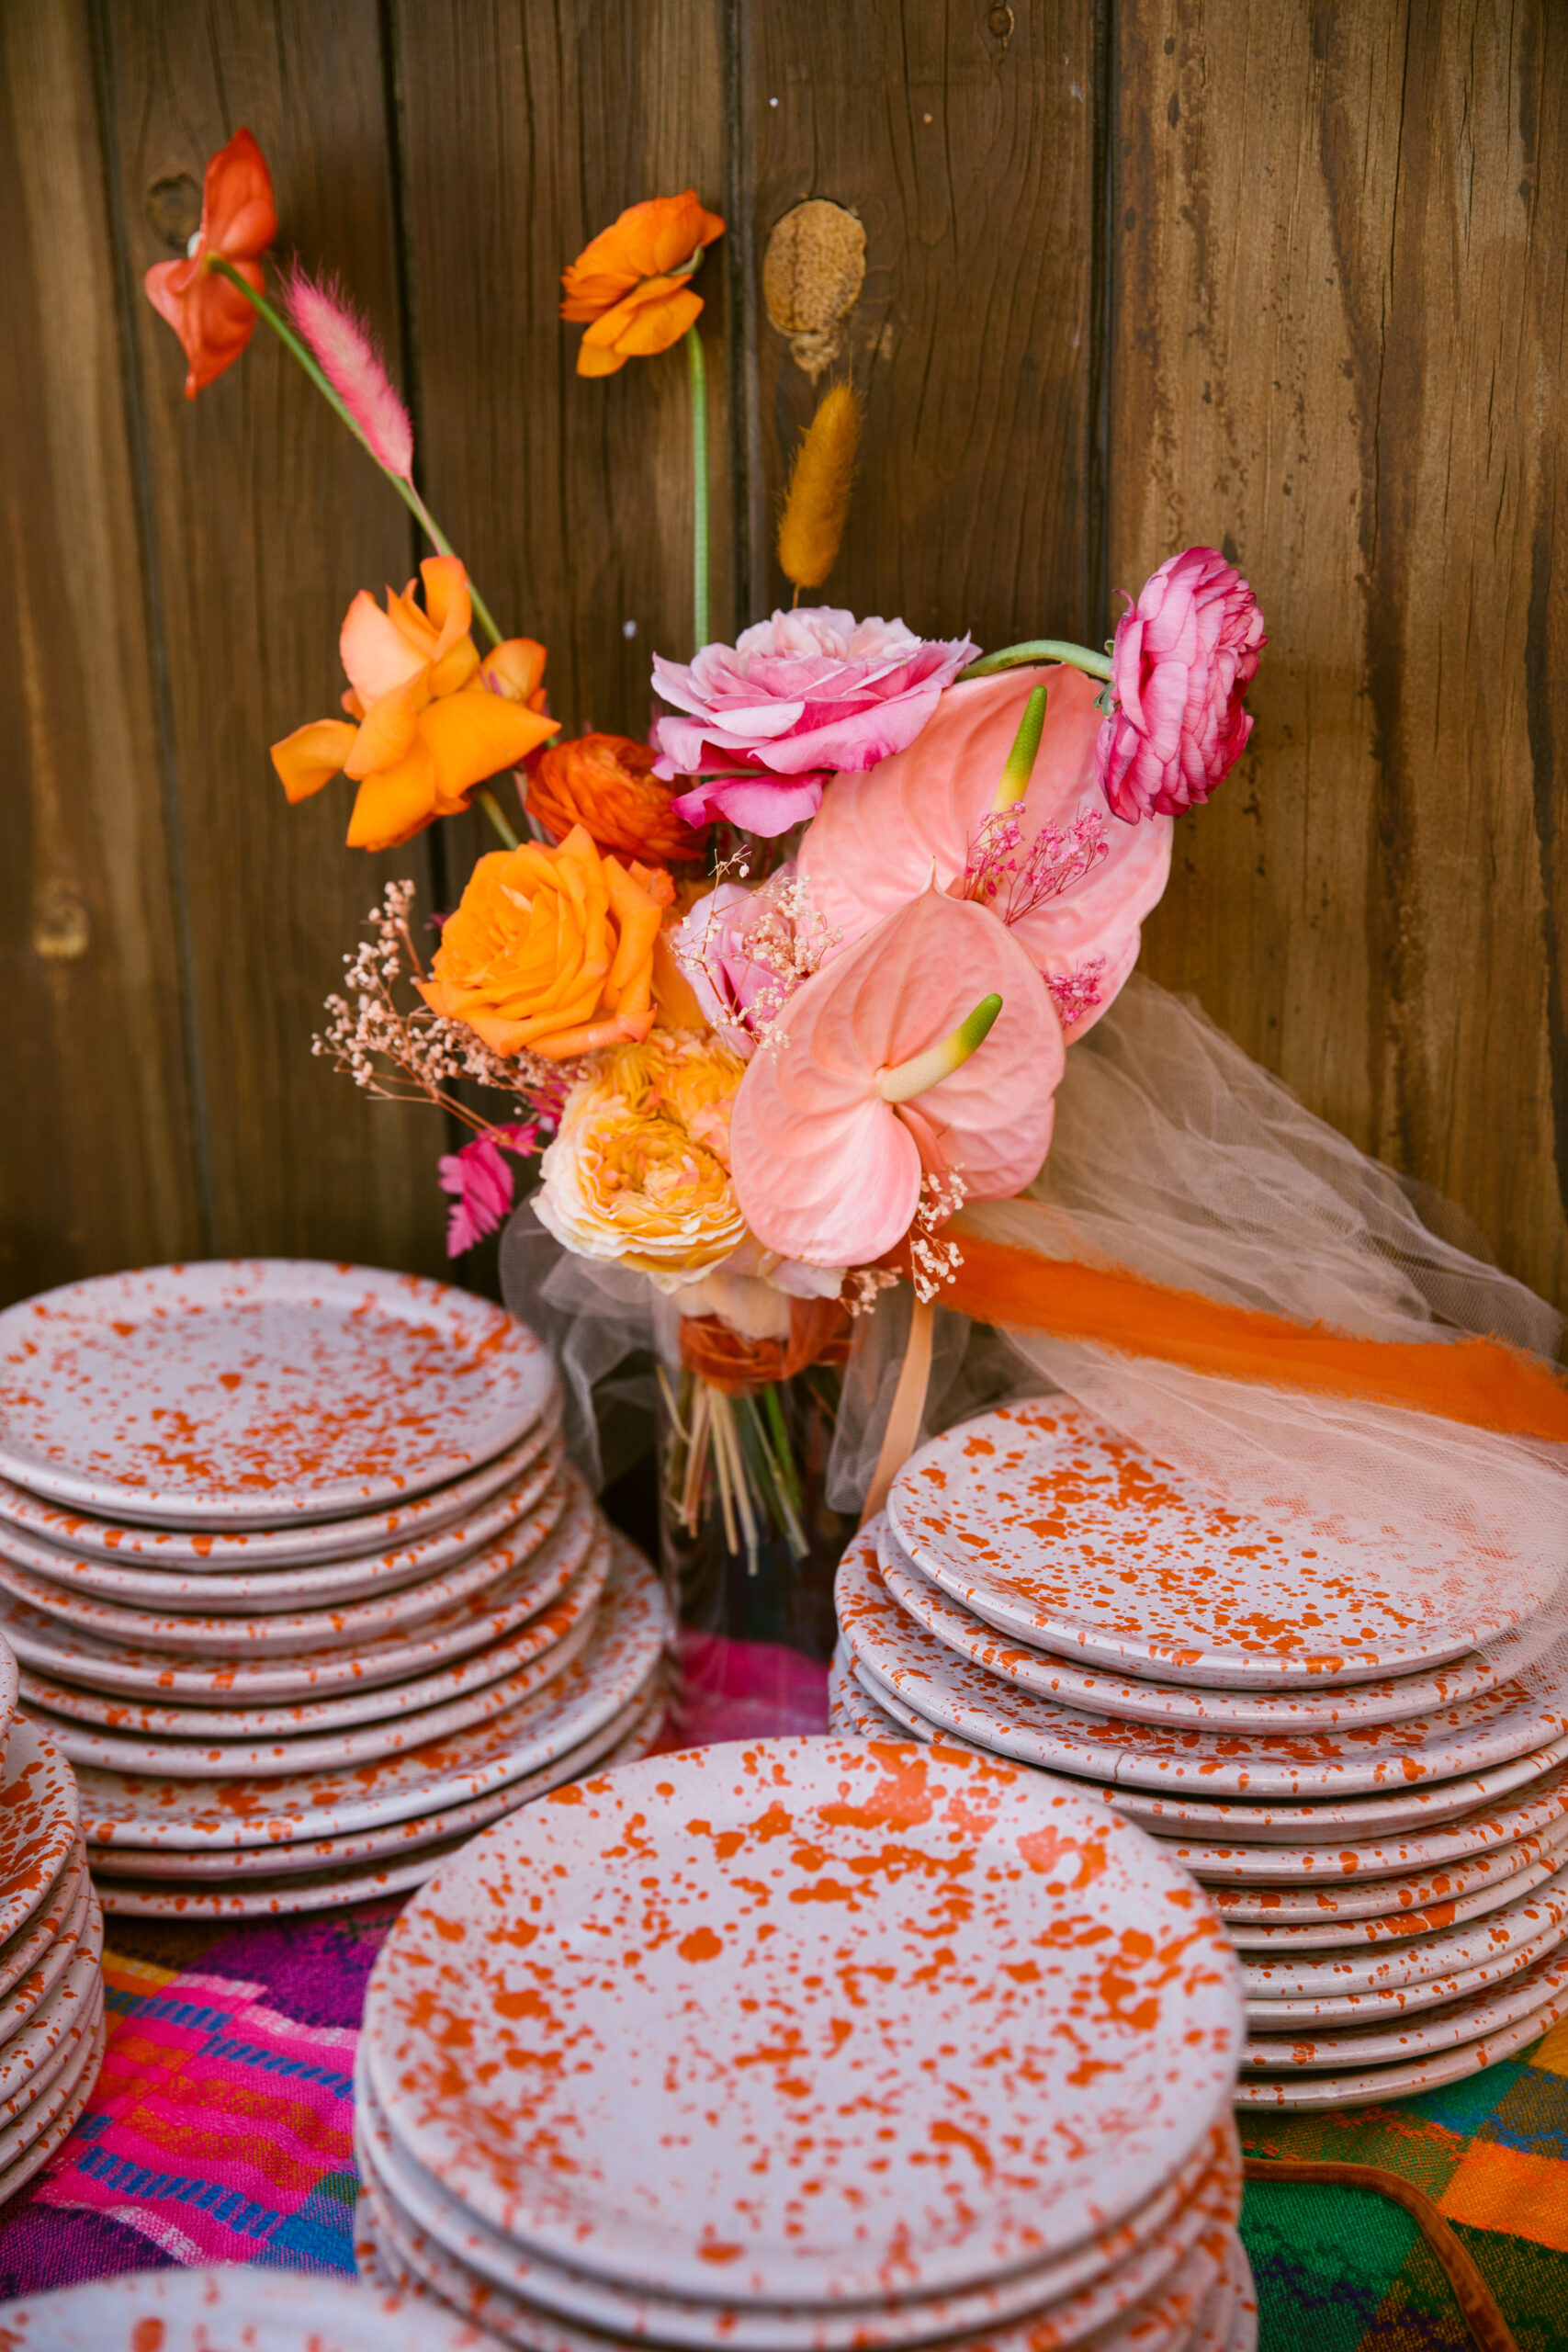 handmade mexican white stone plates with orange paint splatter. colorful pink orange peach and yellow bridal bouquet. colorful wedding dessert table with mexican blanket tablecloth. 